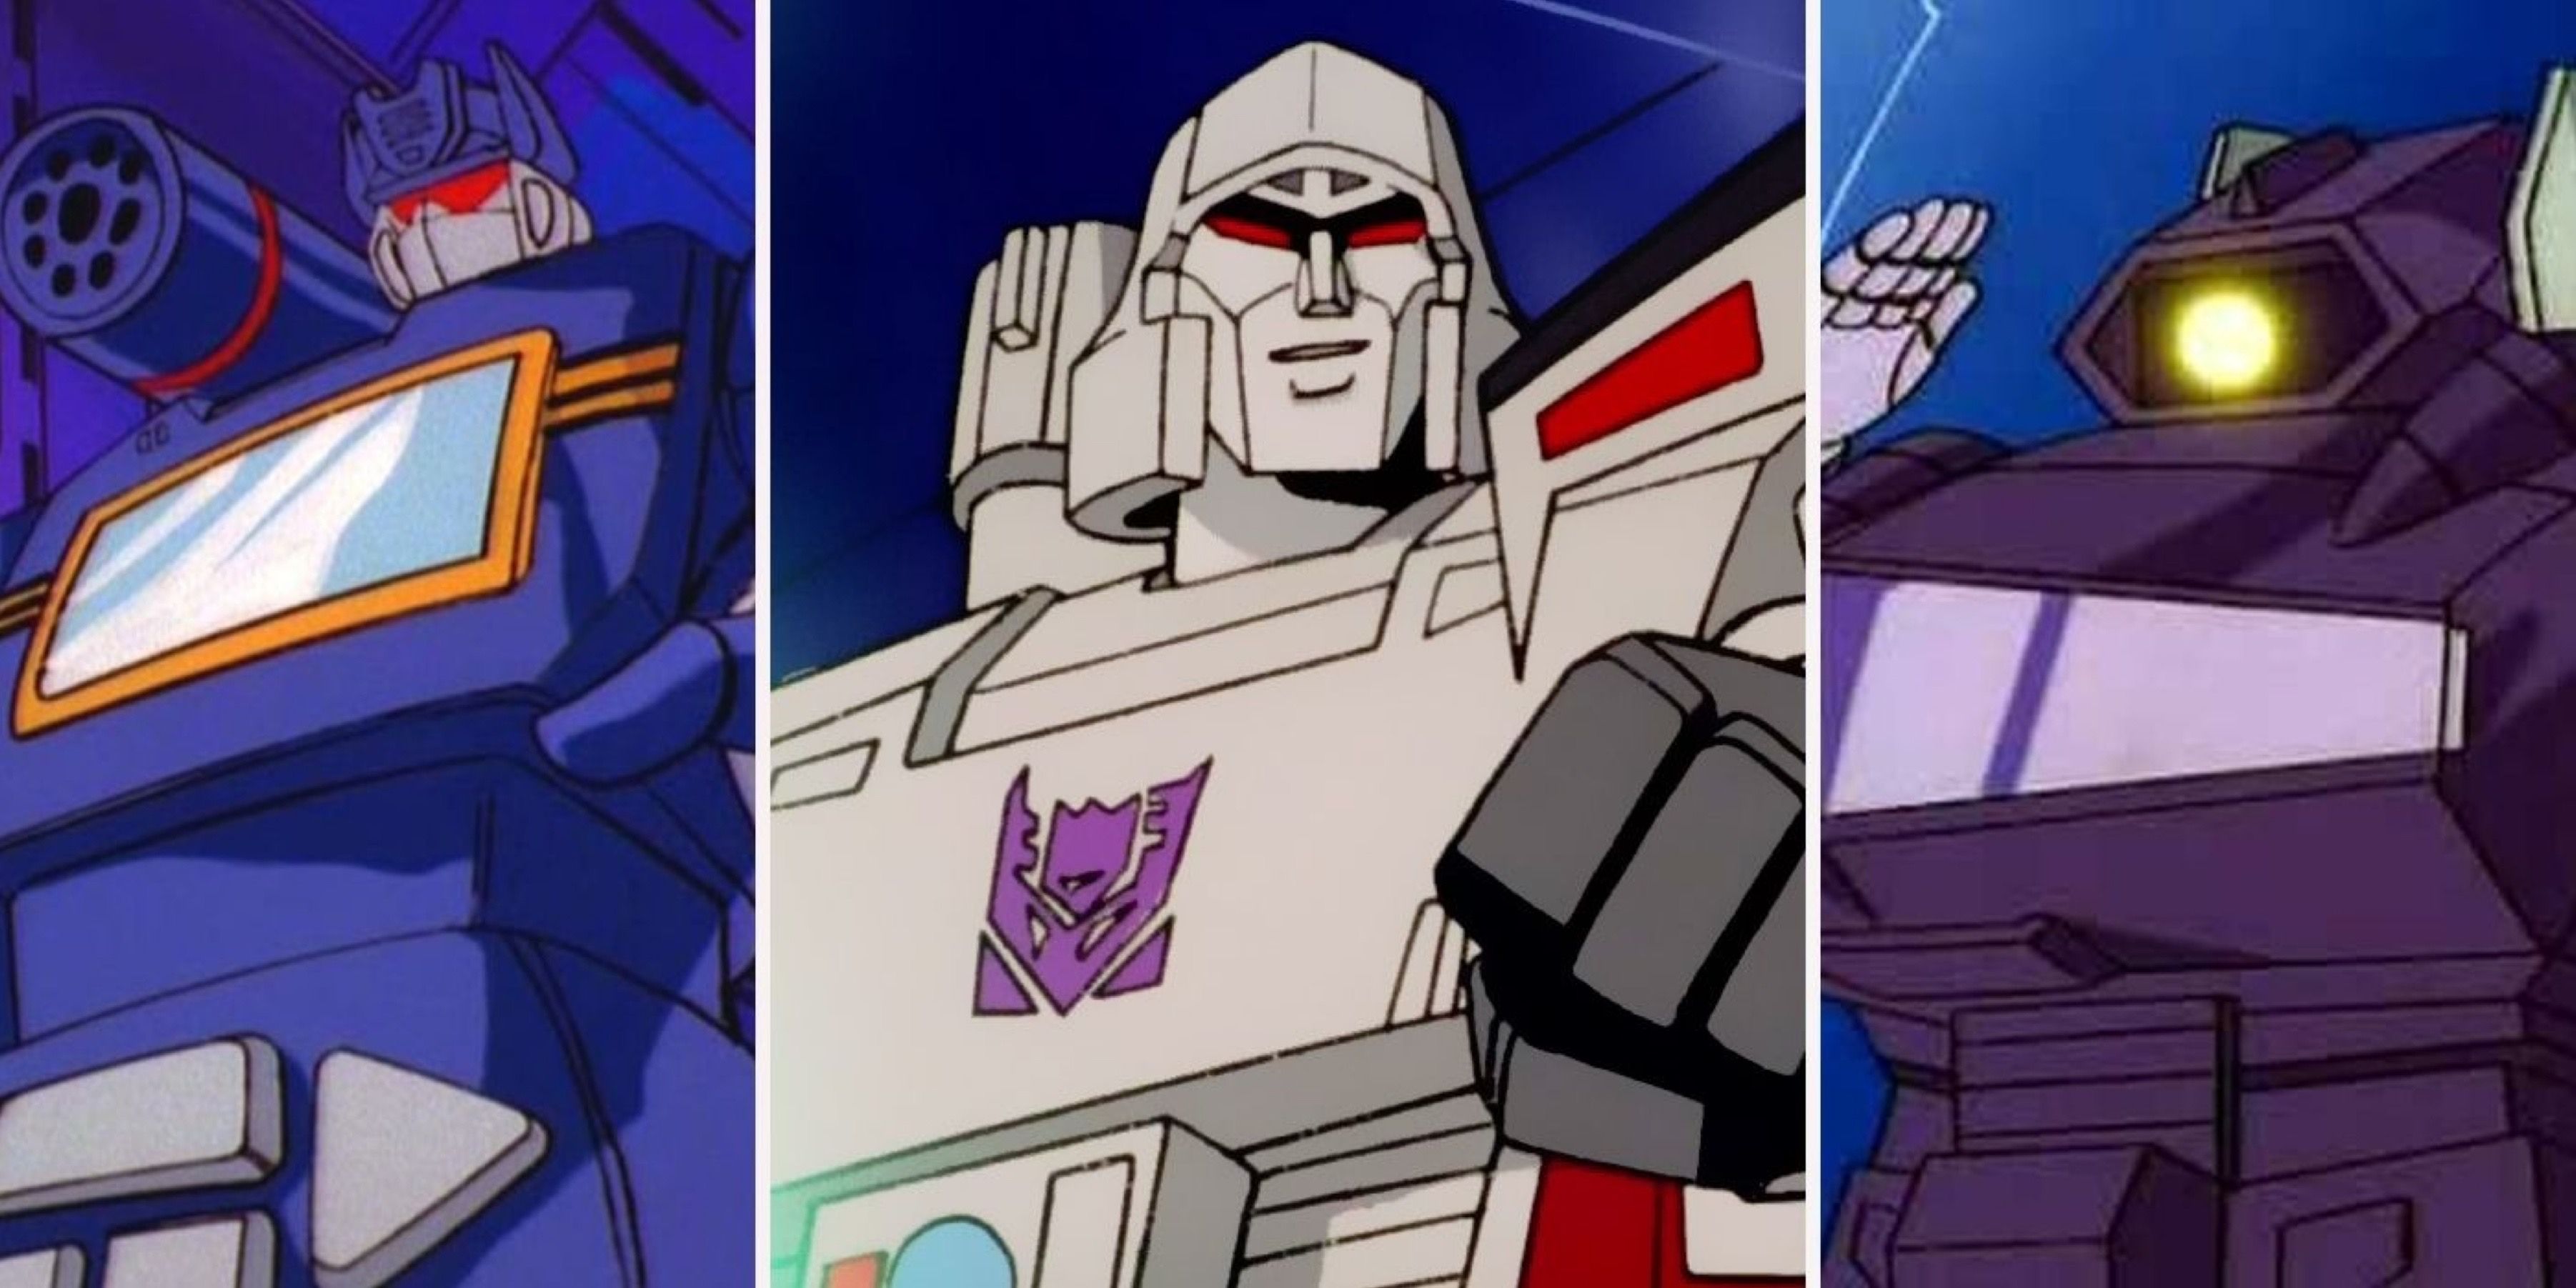 Megatron, Soundwave and Shockwave from Transformers 80s cartoon